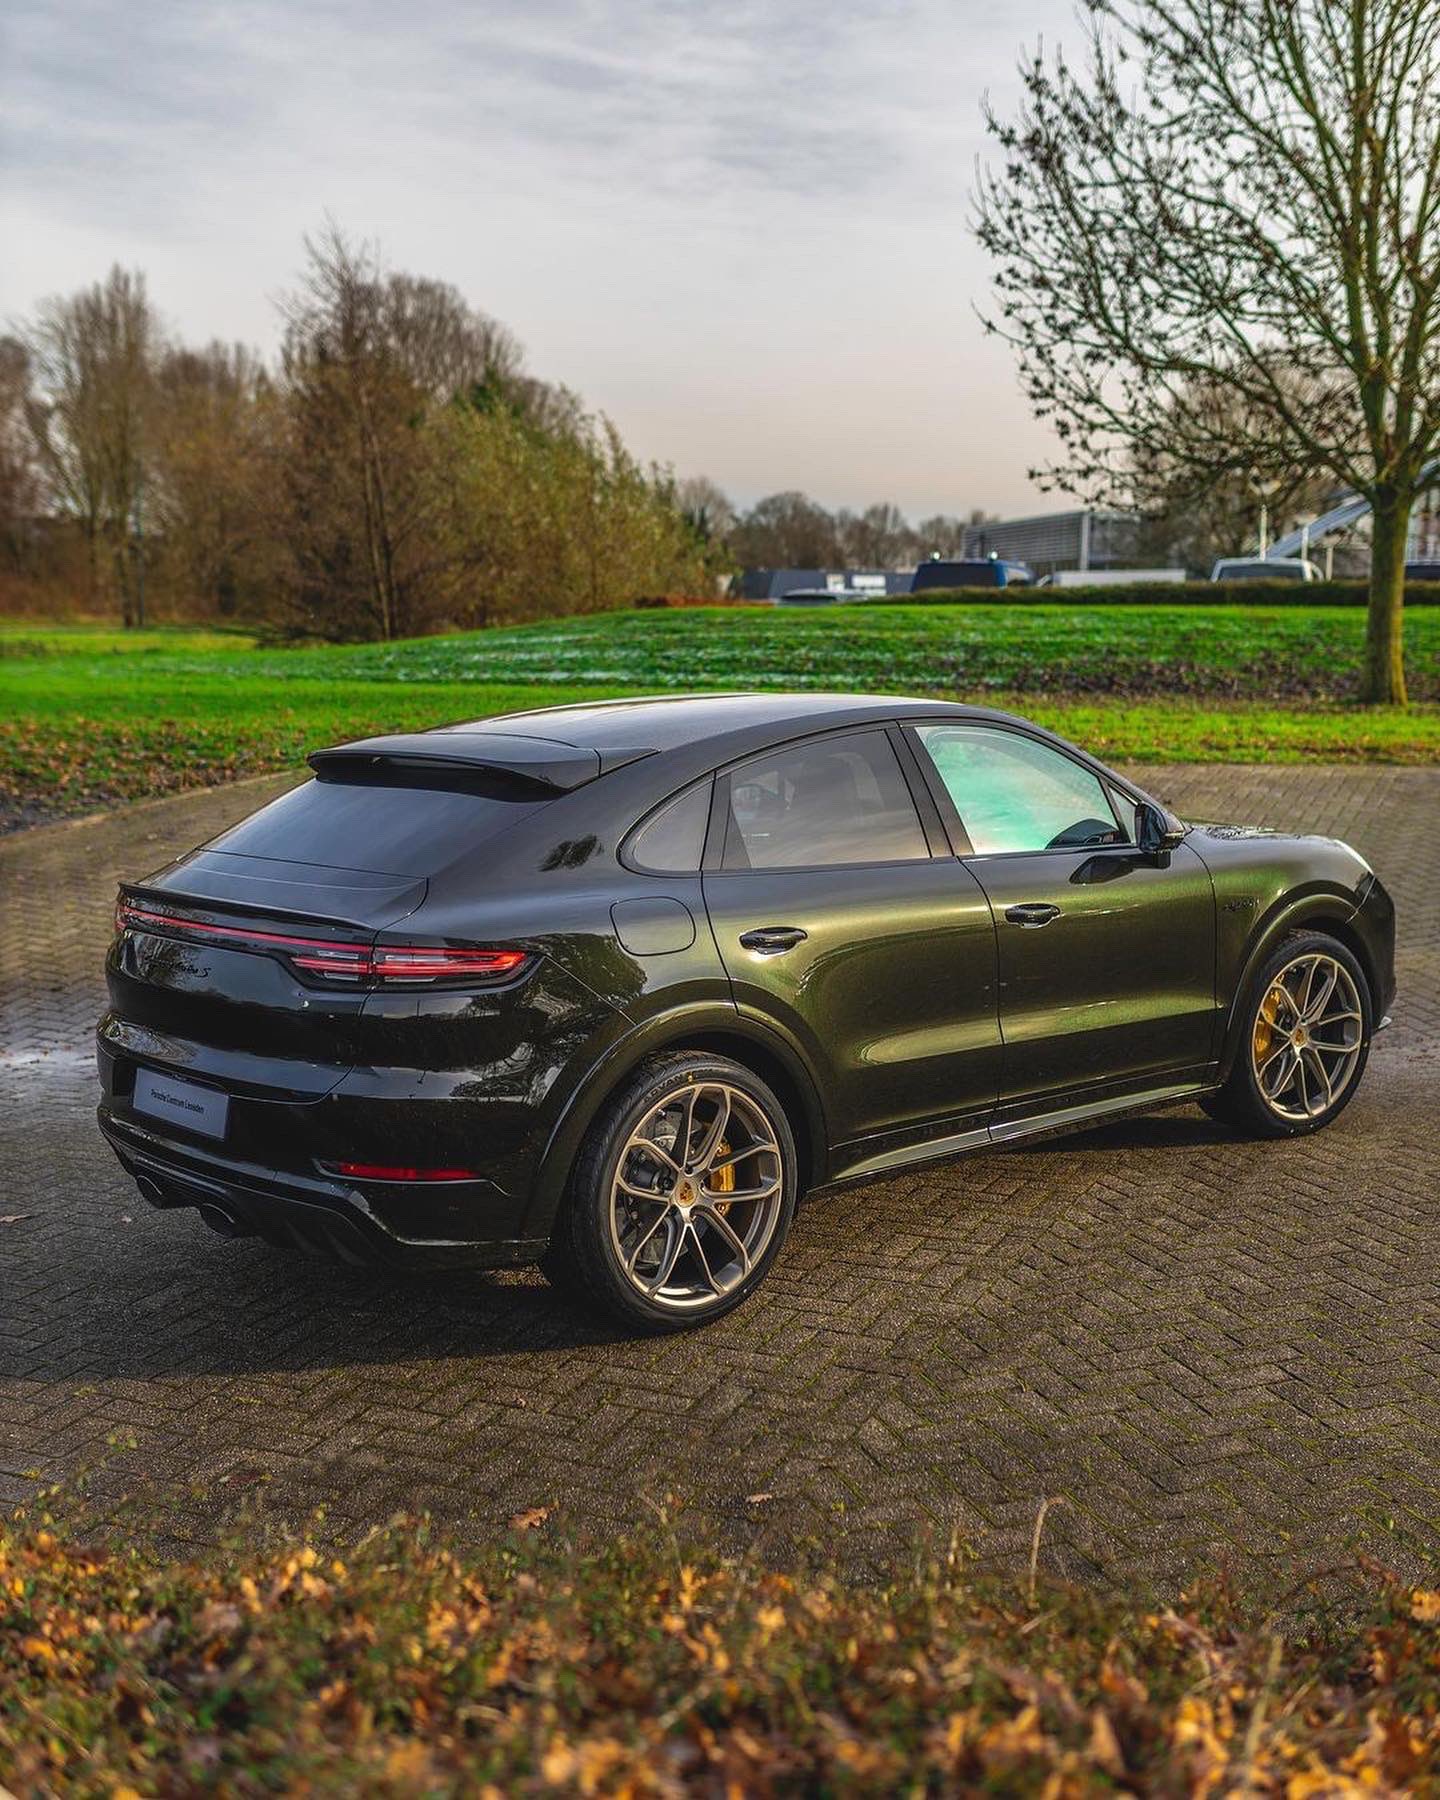 Cayenne Squad on Twitter: "#Porsche #Cayenne Turbo S E-Hybrid Coupé in a  special mysterious PTS color – Dark Olive Green 🫒 Do you like this PTS  color? https://t.co/5wZQ6bU7Dr" / Twitter